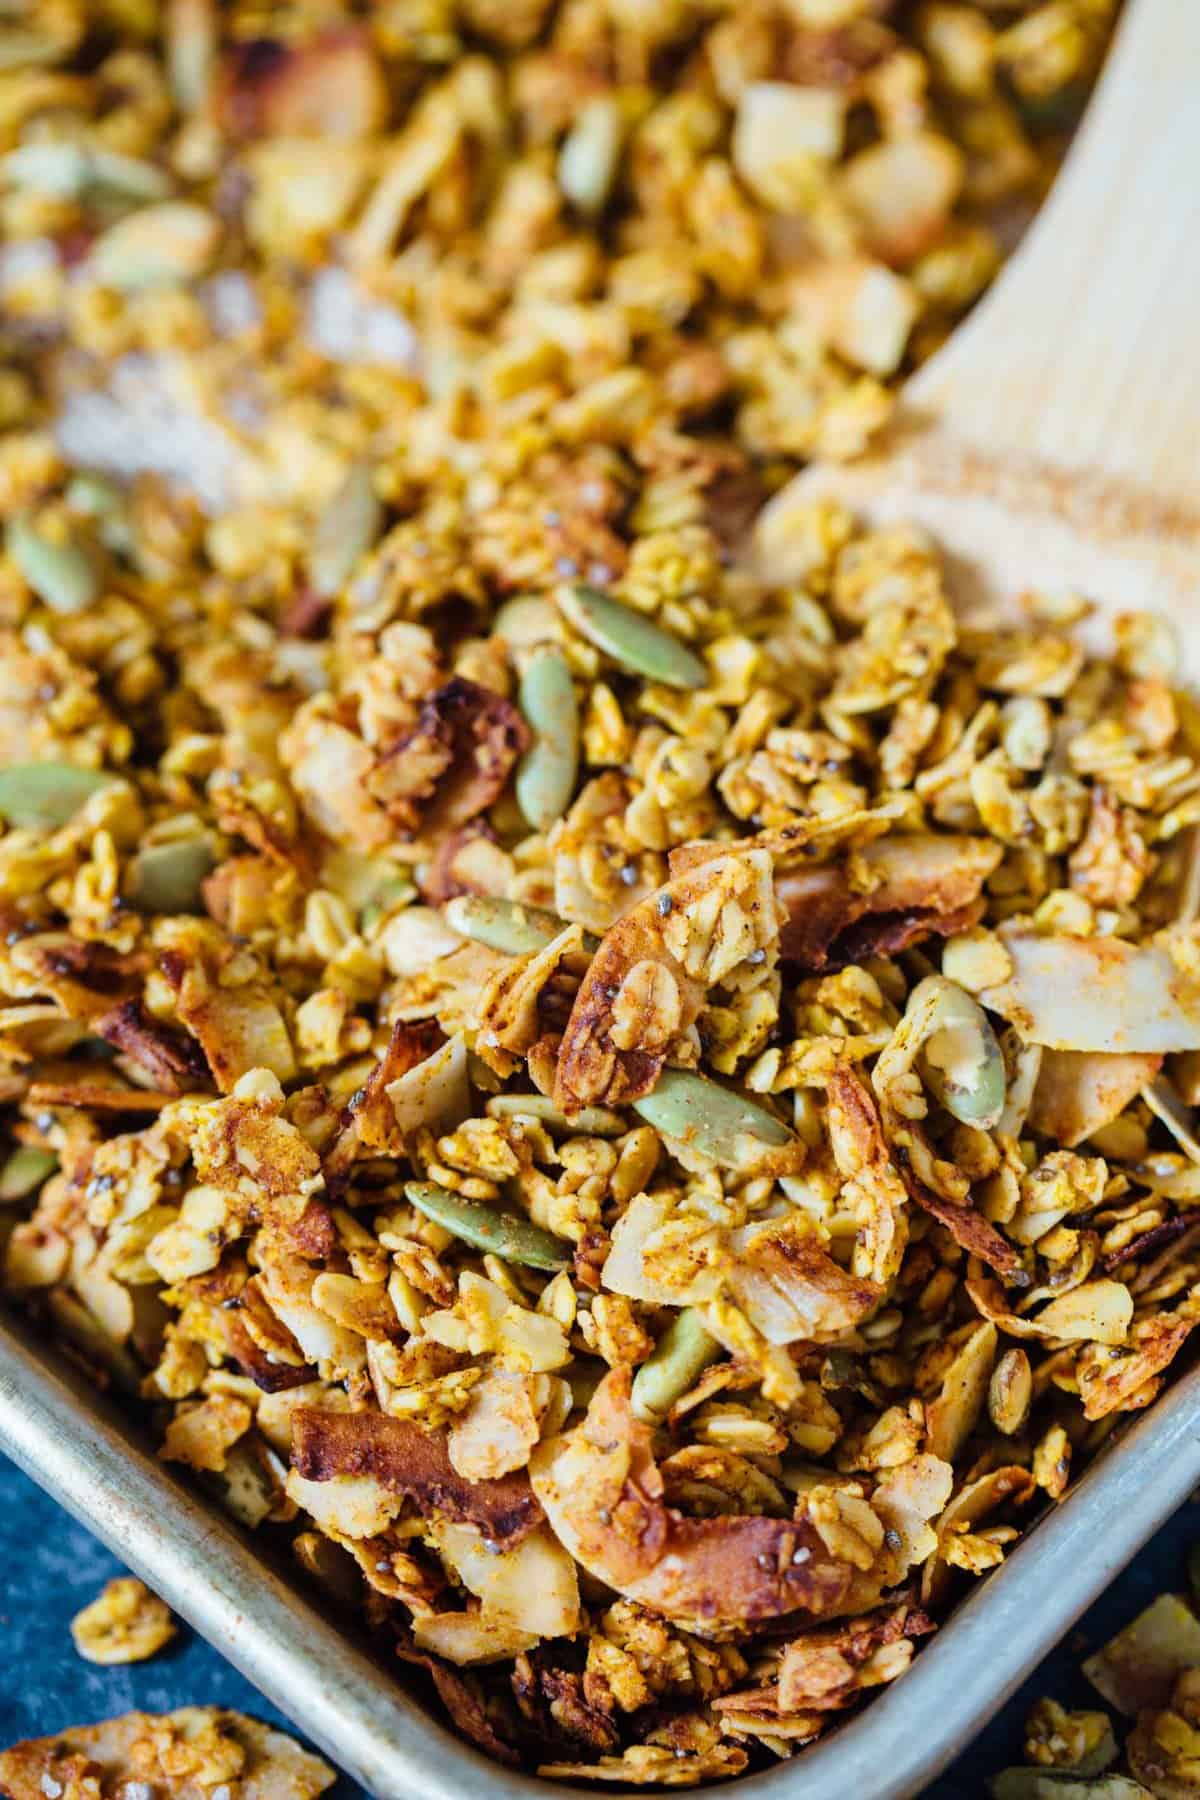 This pumpkin coconut granola has all the flavors of Fall in this sweet and salty combination! It's perfect to top on plain yogurt, oats, or even with milk! #granola #pumpkincoconut #coconut #pumpkinrecipe #granolarecipe